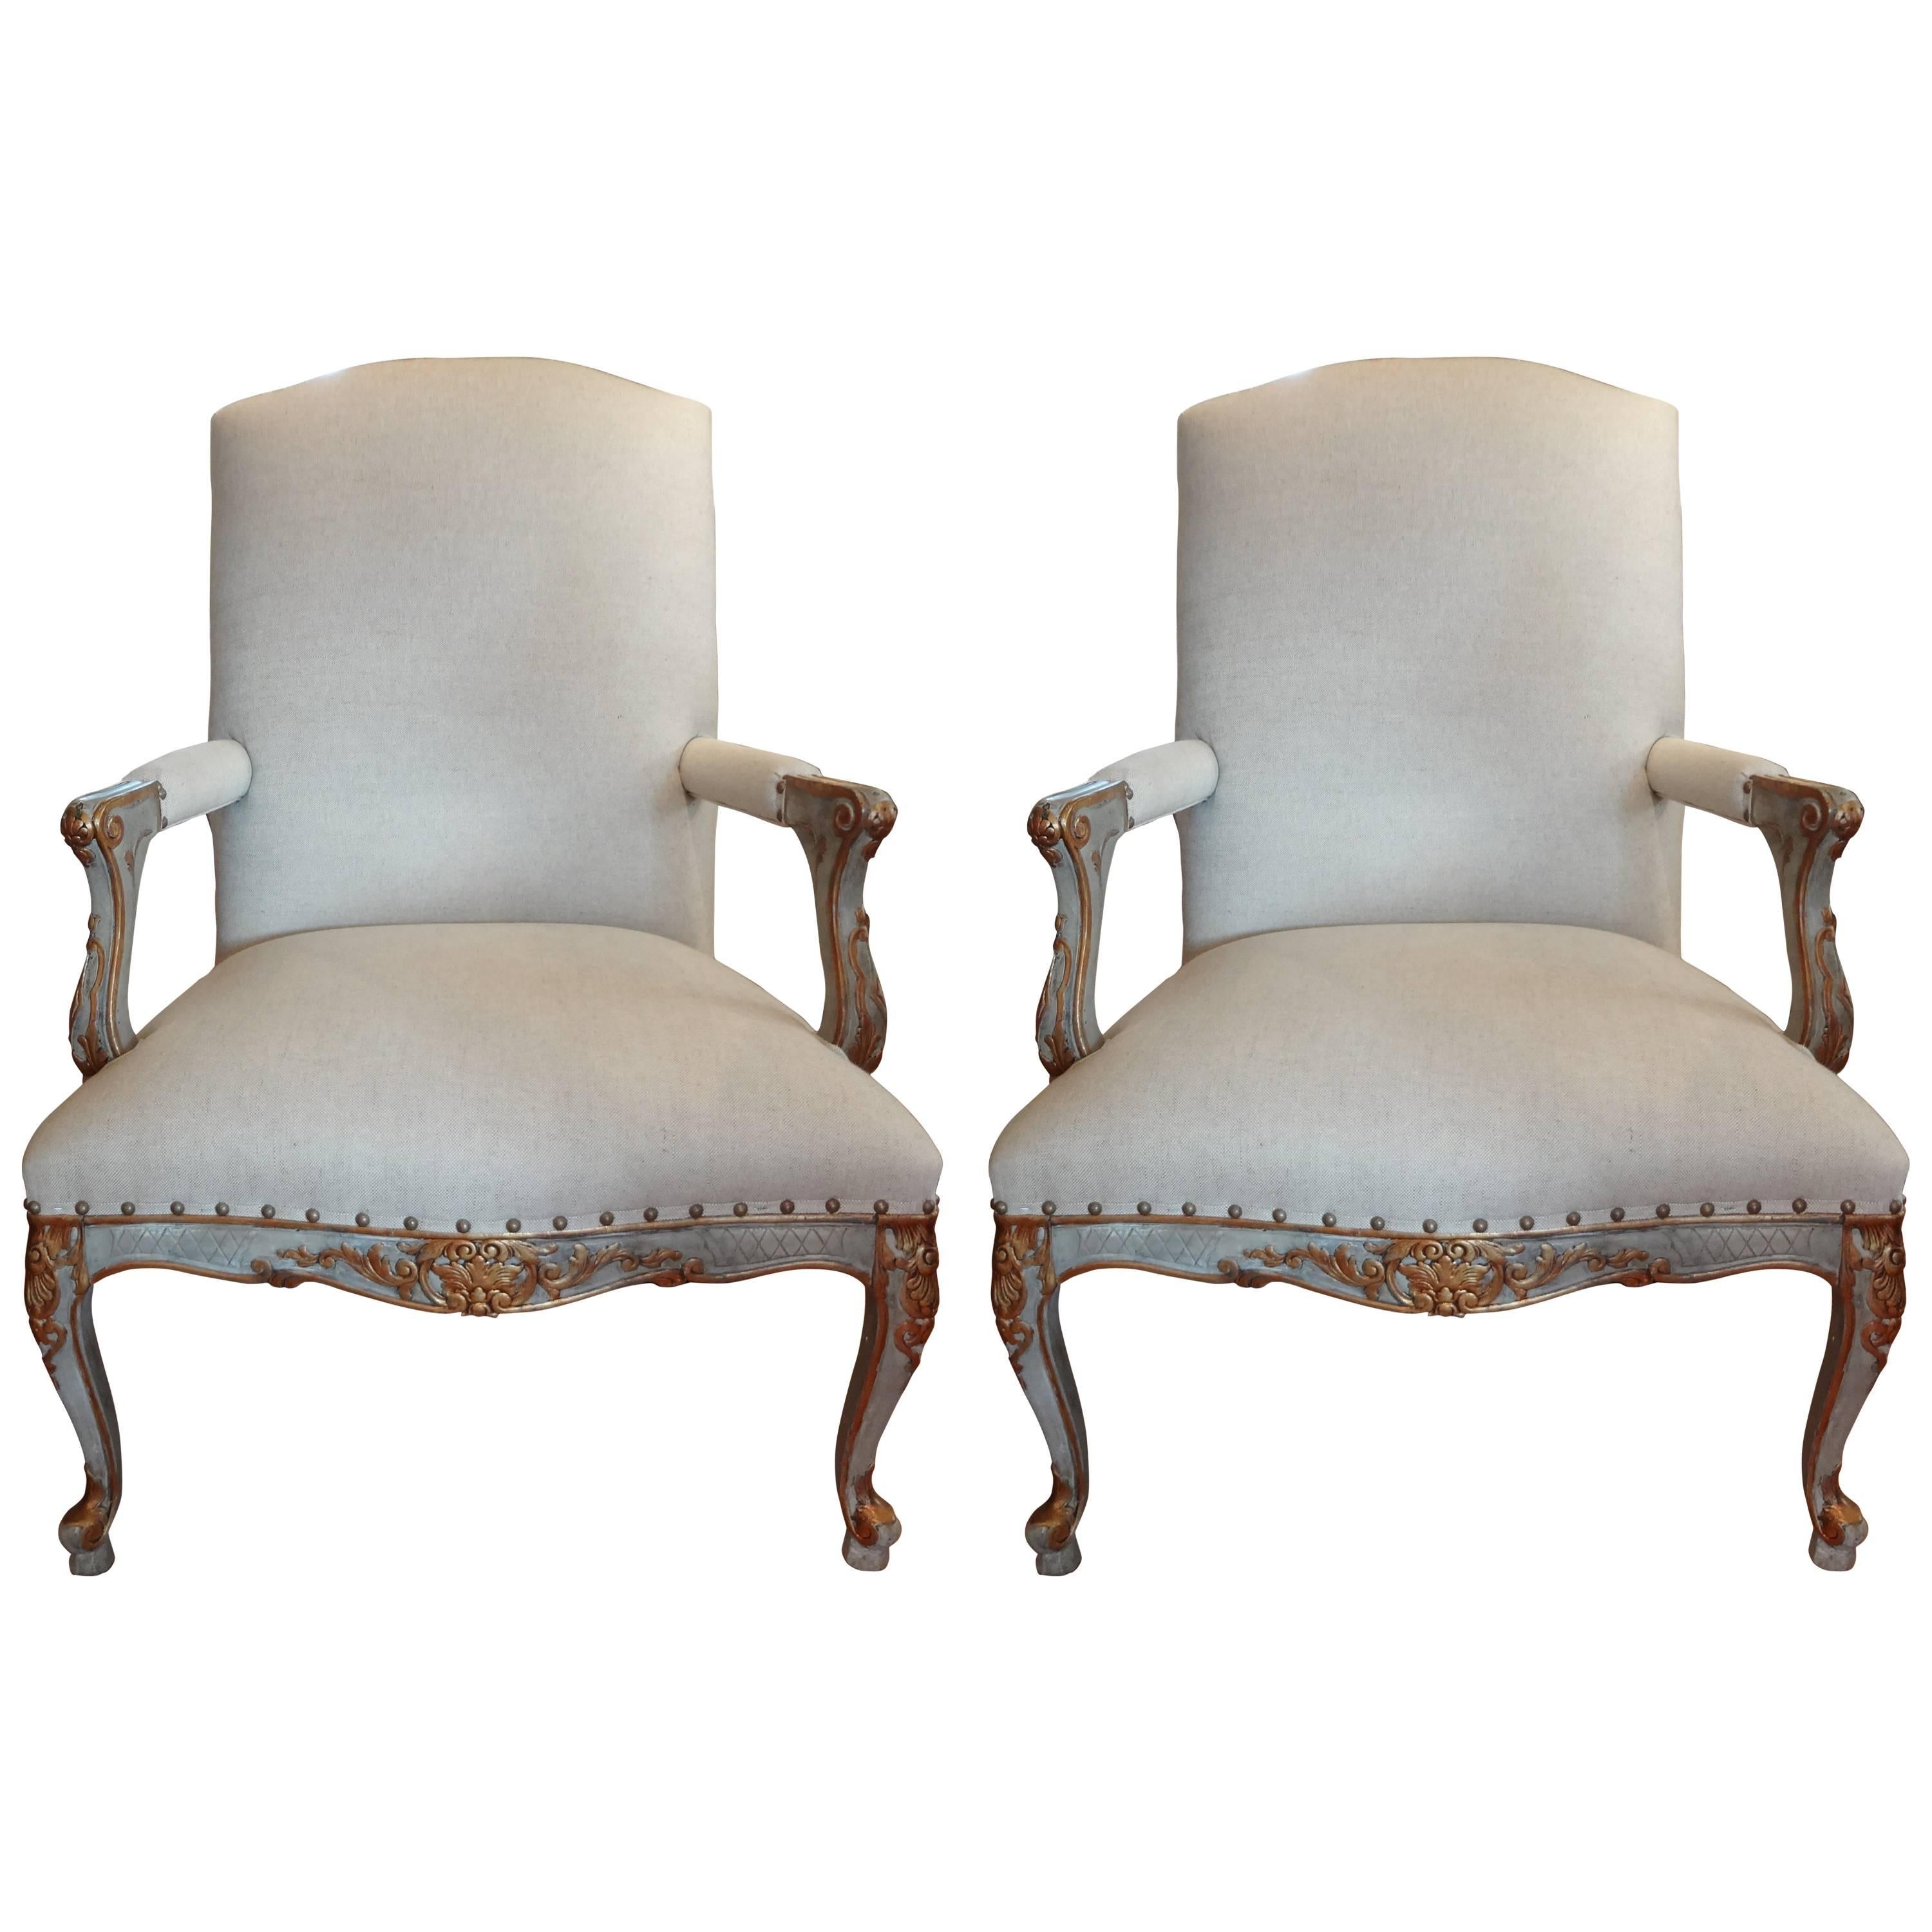 Large Pair Of Antique French Louis XV Style Painted And Gilt Chairs